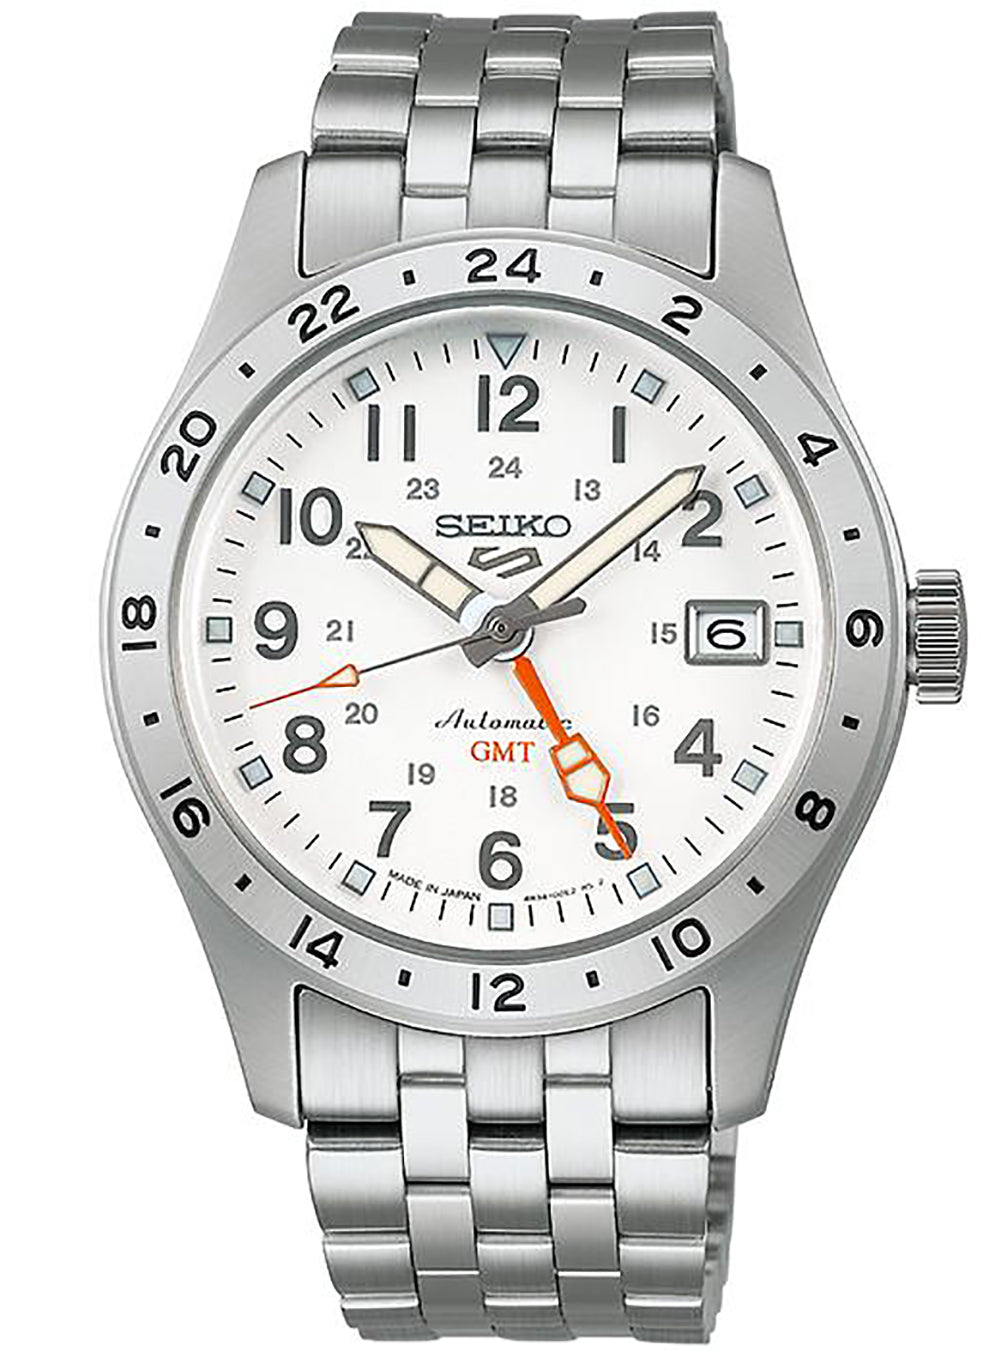 SEIKO 5 SPORTS FIELD SPORTS STYLE GMT MEN'S MADE IN JAPAN